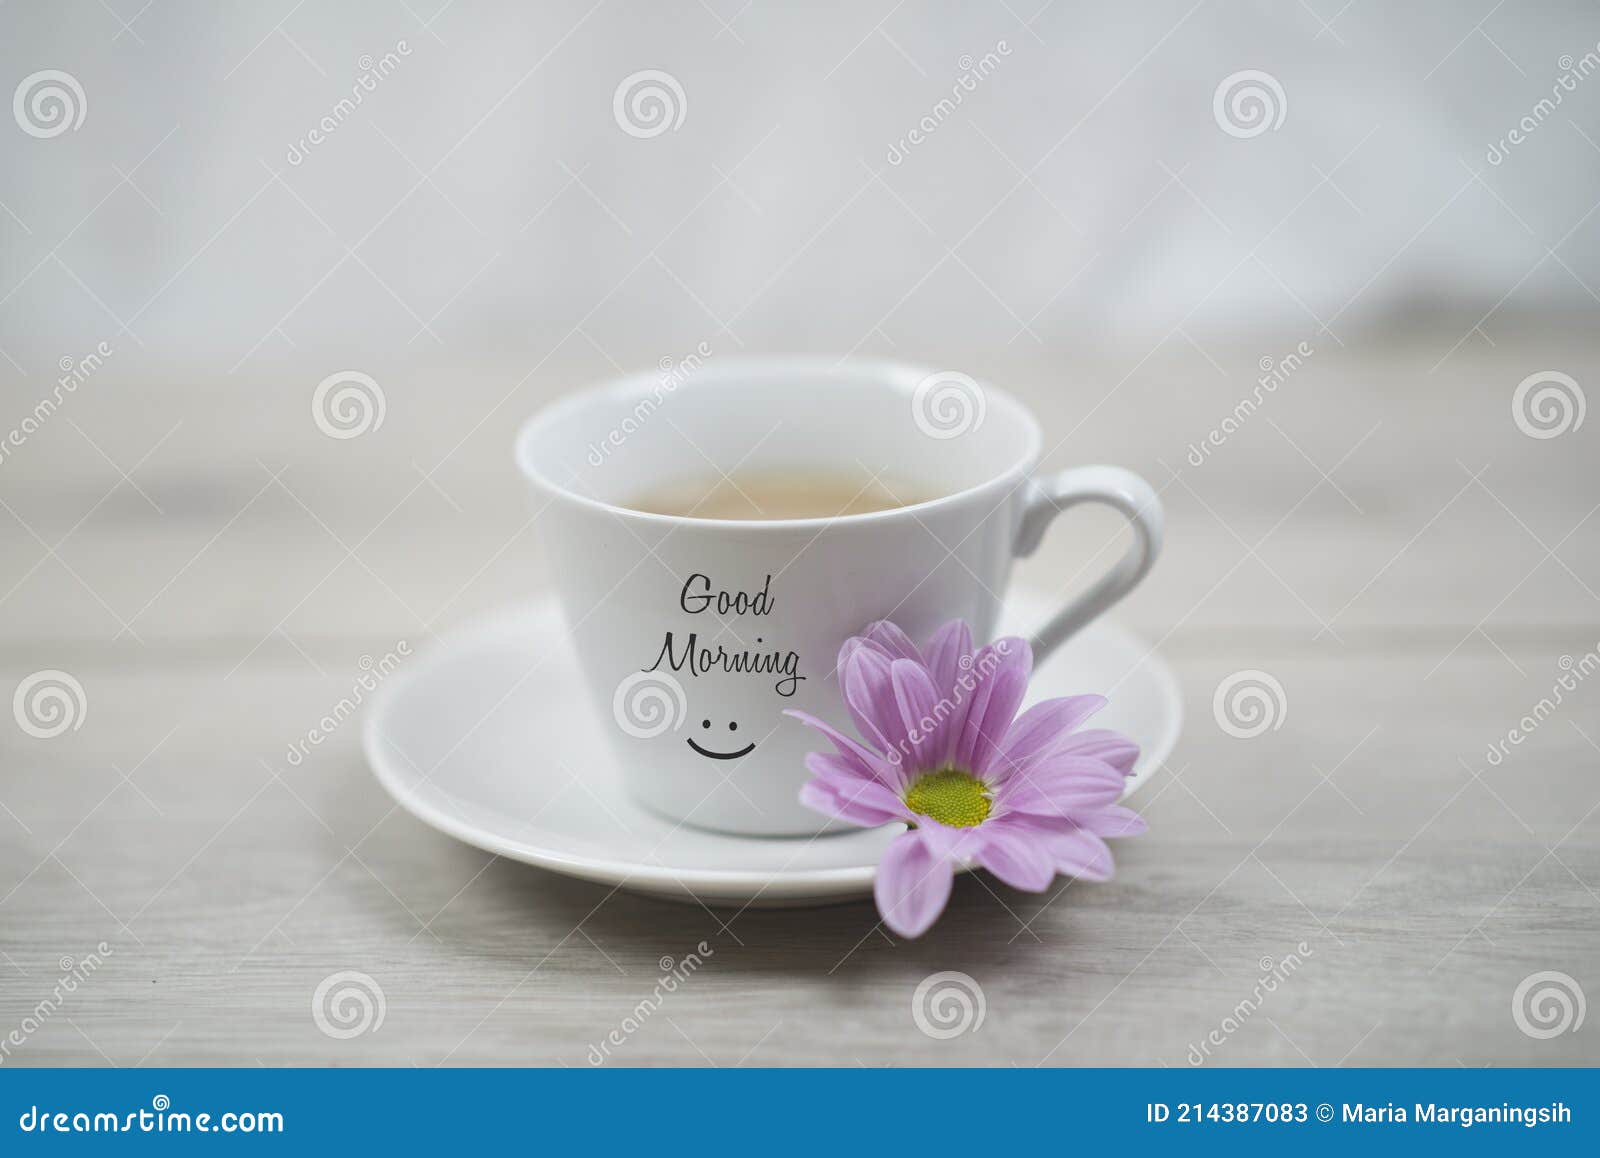 Good Morning. Fresh Morning Greeting with Cup of Morning Coffee ...